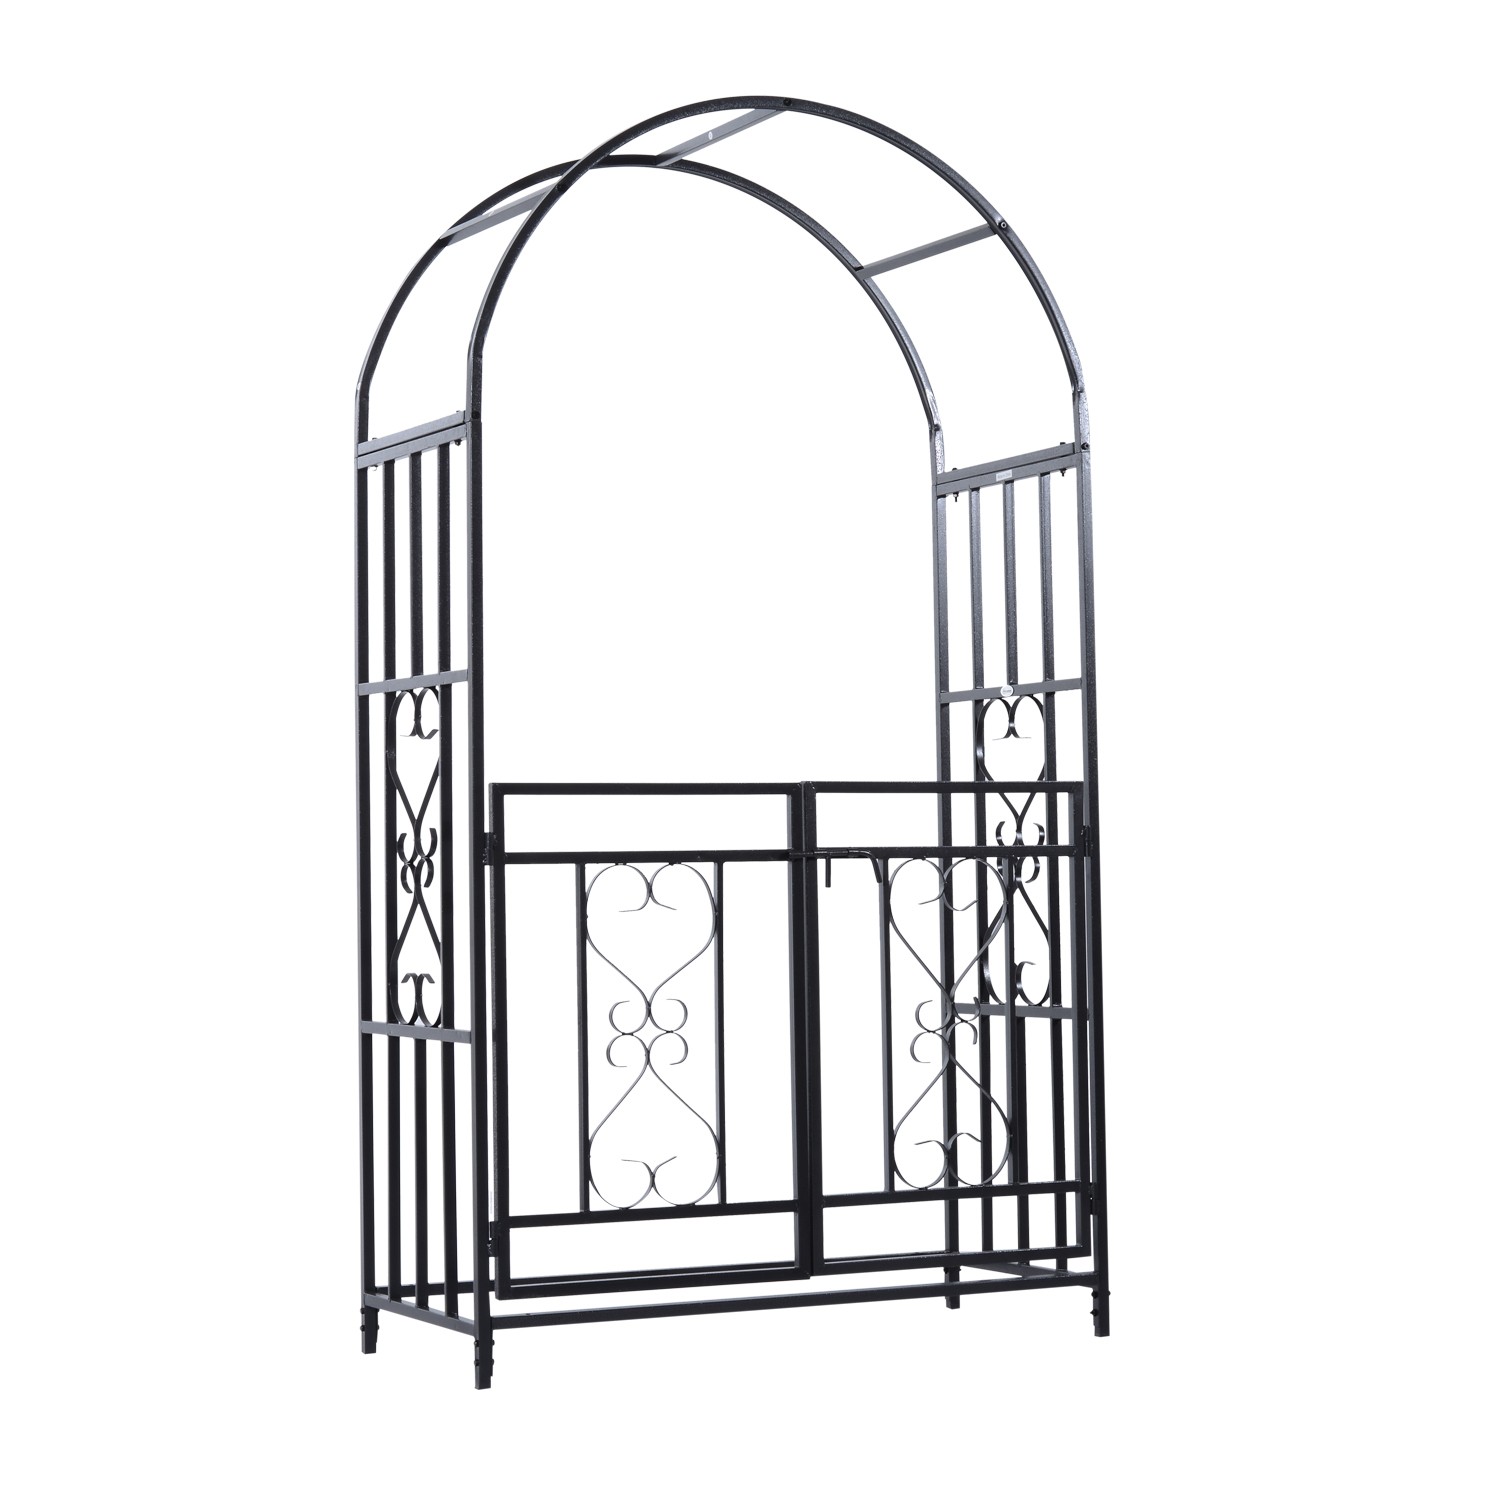 Outsunny Decorative Metal Backyard Gated Garden Arch - Bestsellers